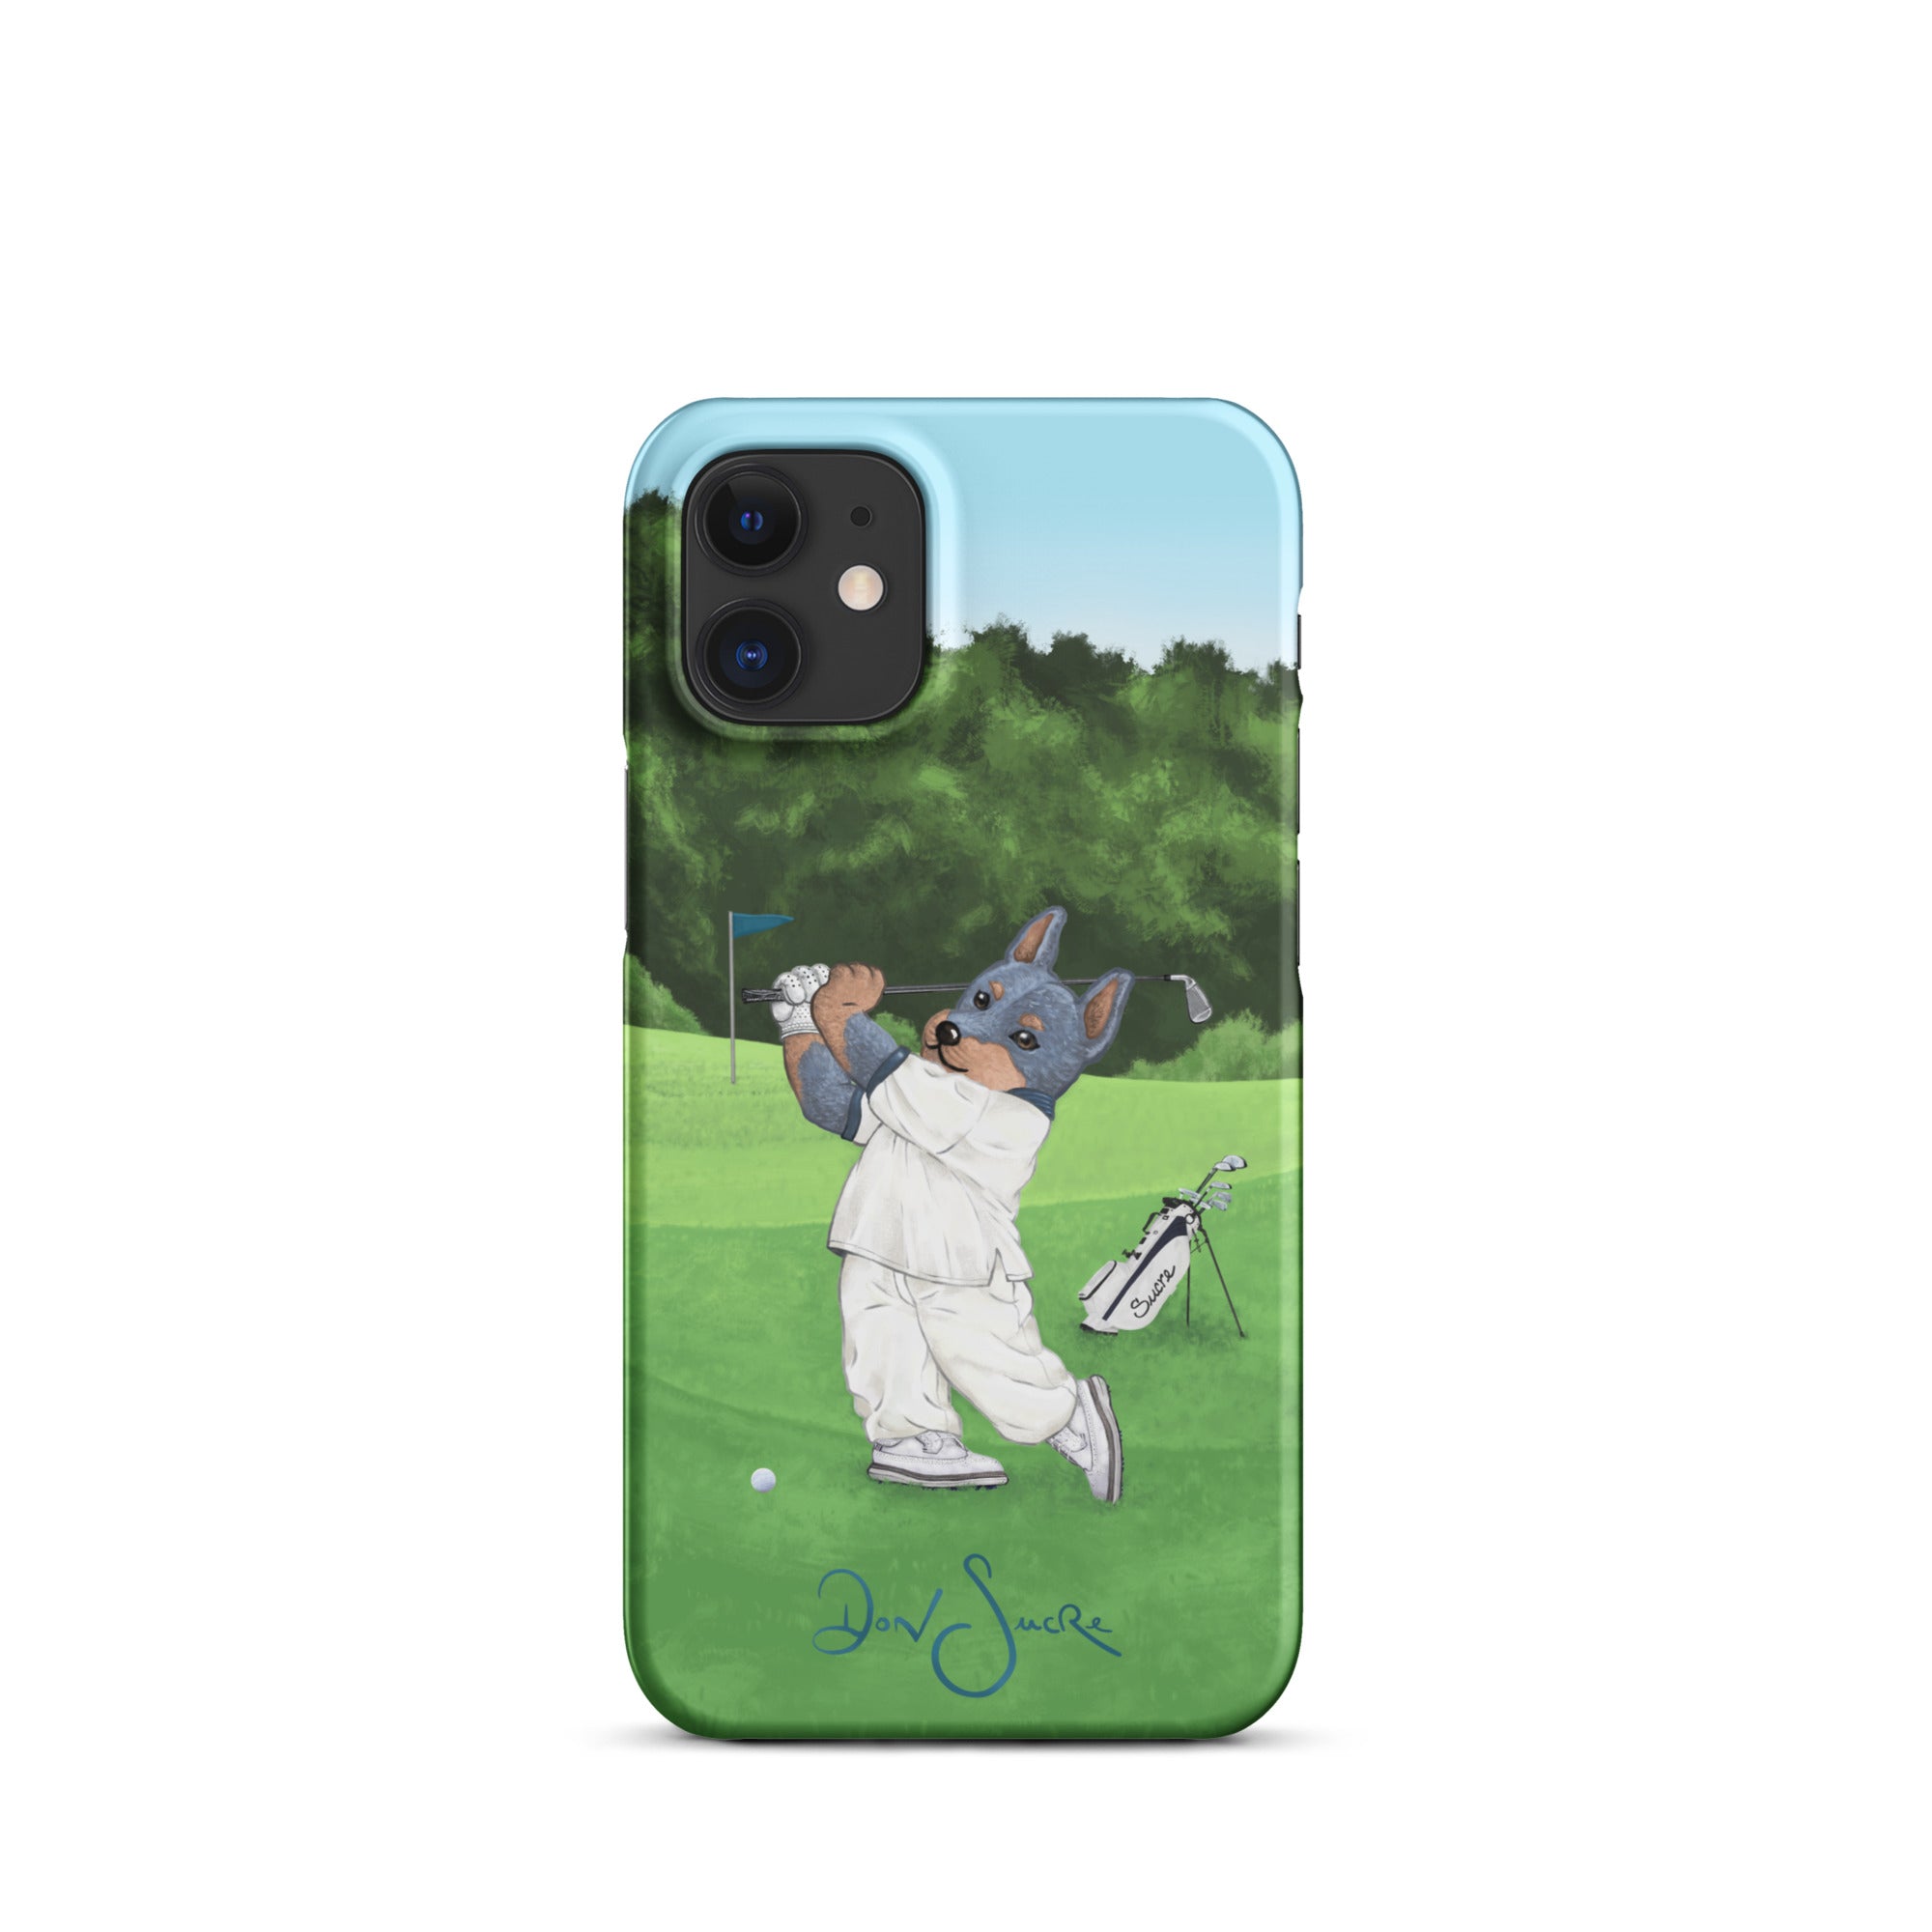 "The Ace" iPhone case